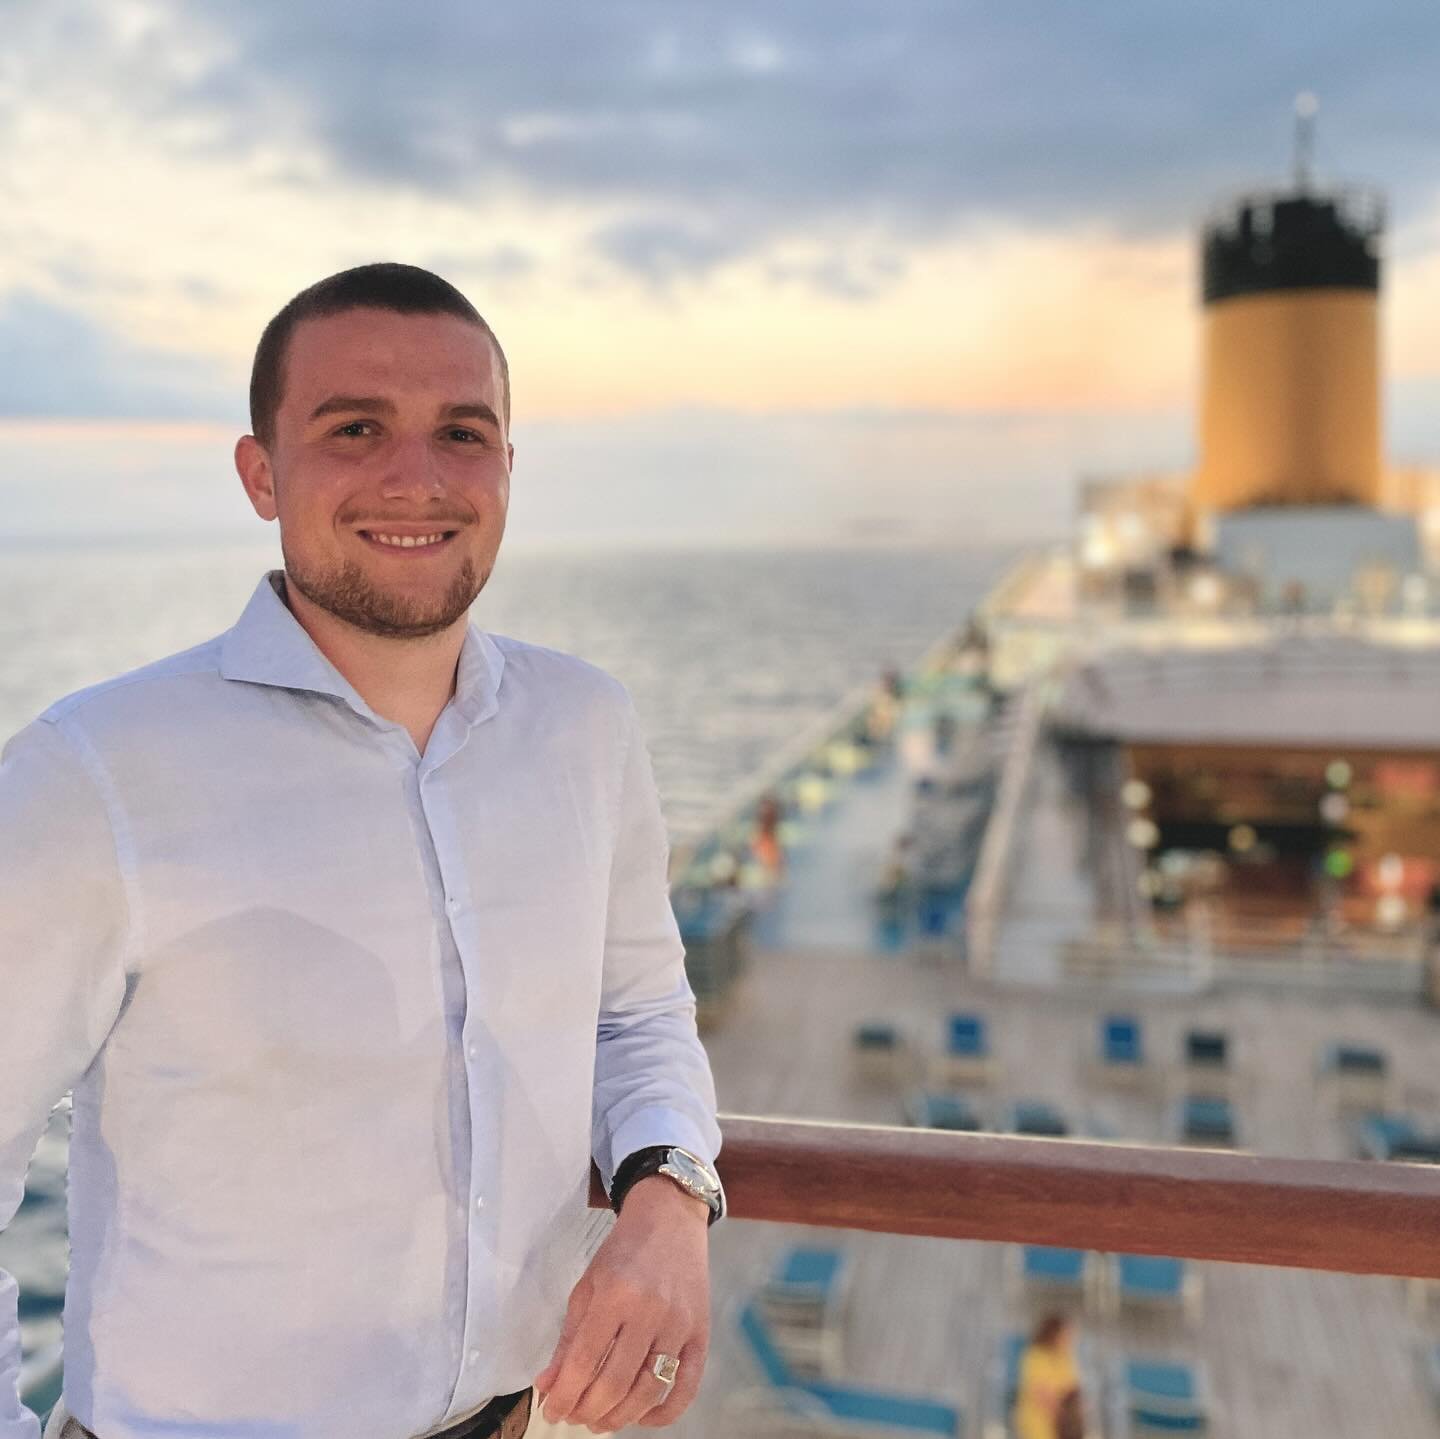 about yesterday 🗞️ 

Getting up this morning and seeing myself in the largest online newspaper in Switzerland fills me with pride. I have been passionate about cruises since I was a child, and today I carry this enthusiasm and motivation into my job